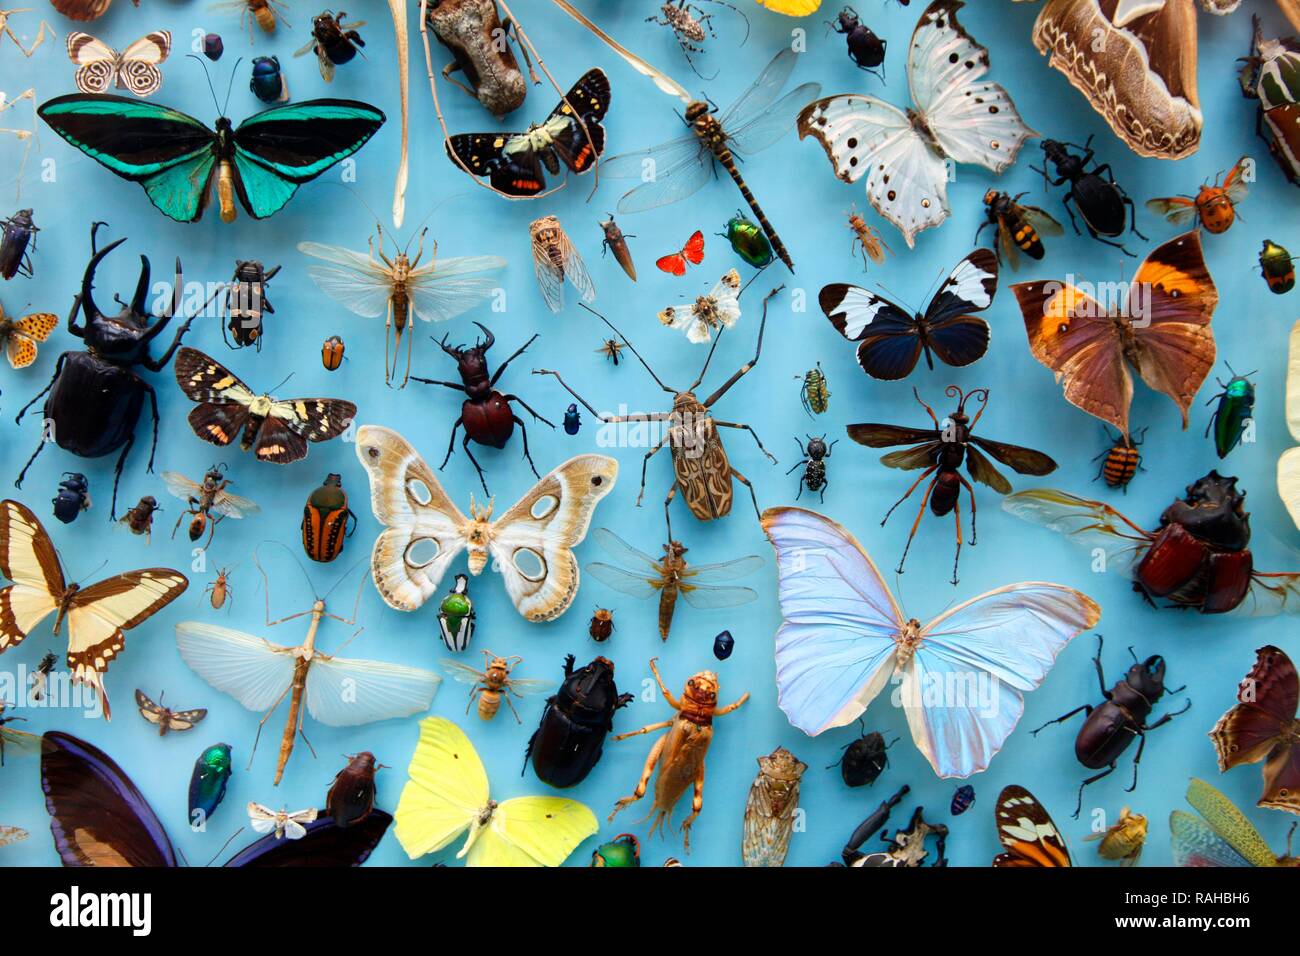 Collection of insects, moths, butterflies and beetles from around the world, Oxford University Museum of Natural History Stock Photo